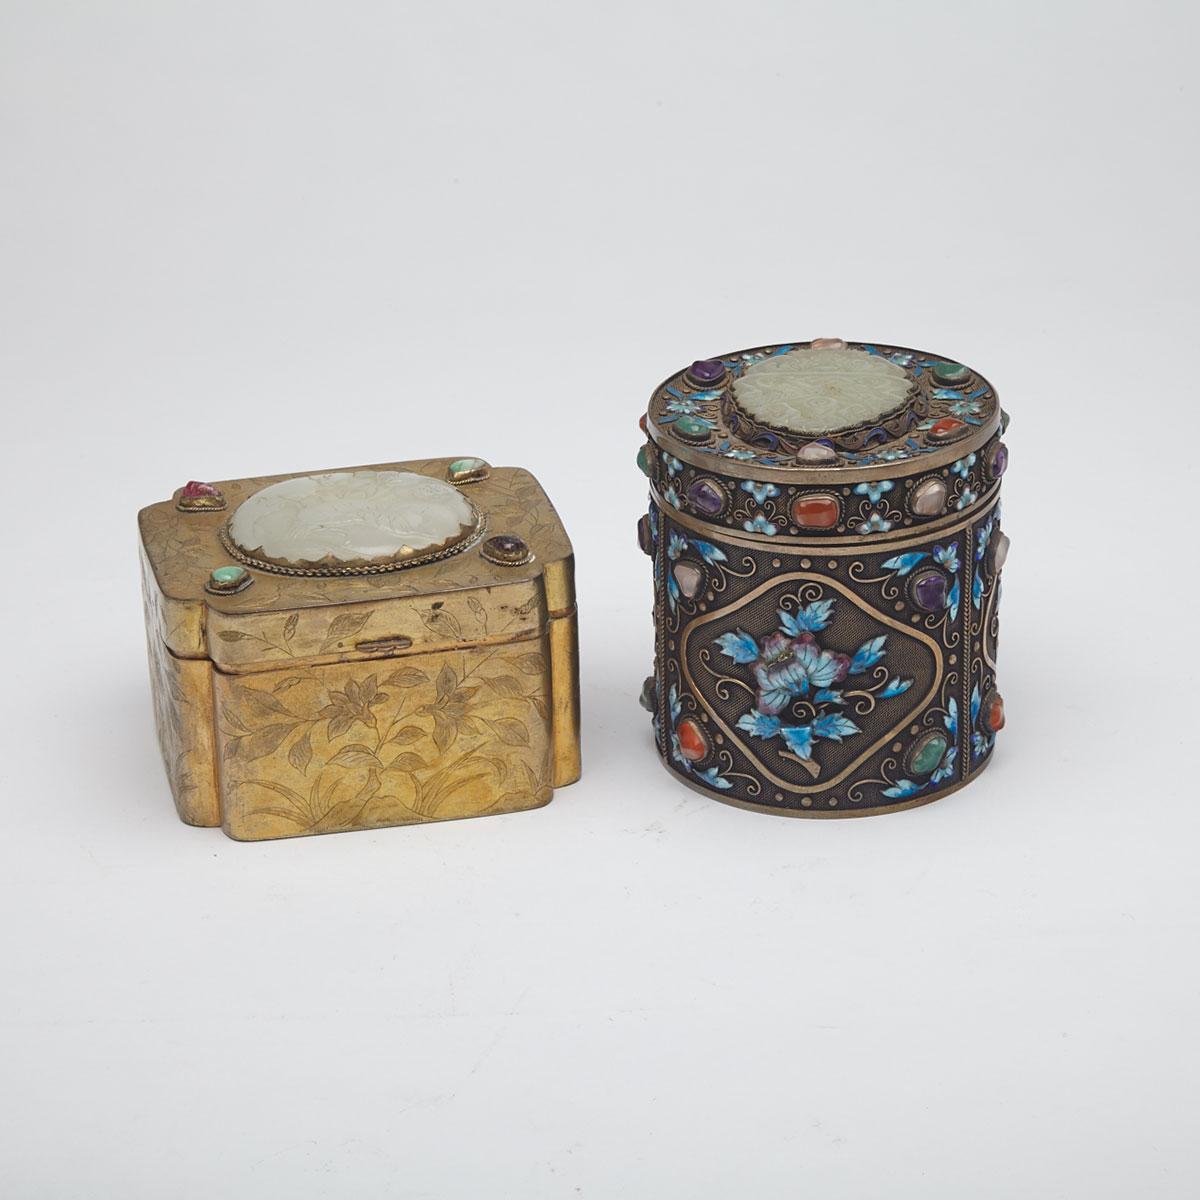 Two Bronze Boxes with Jade Inlays, China, Late Qing Dynasty